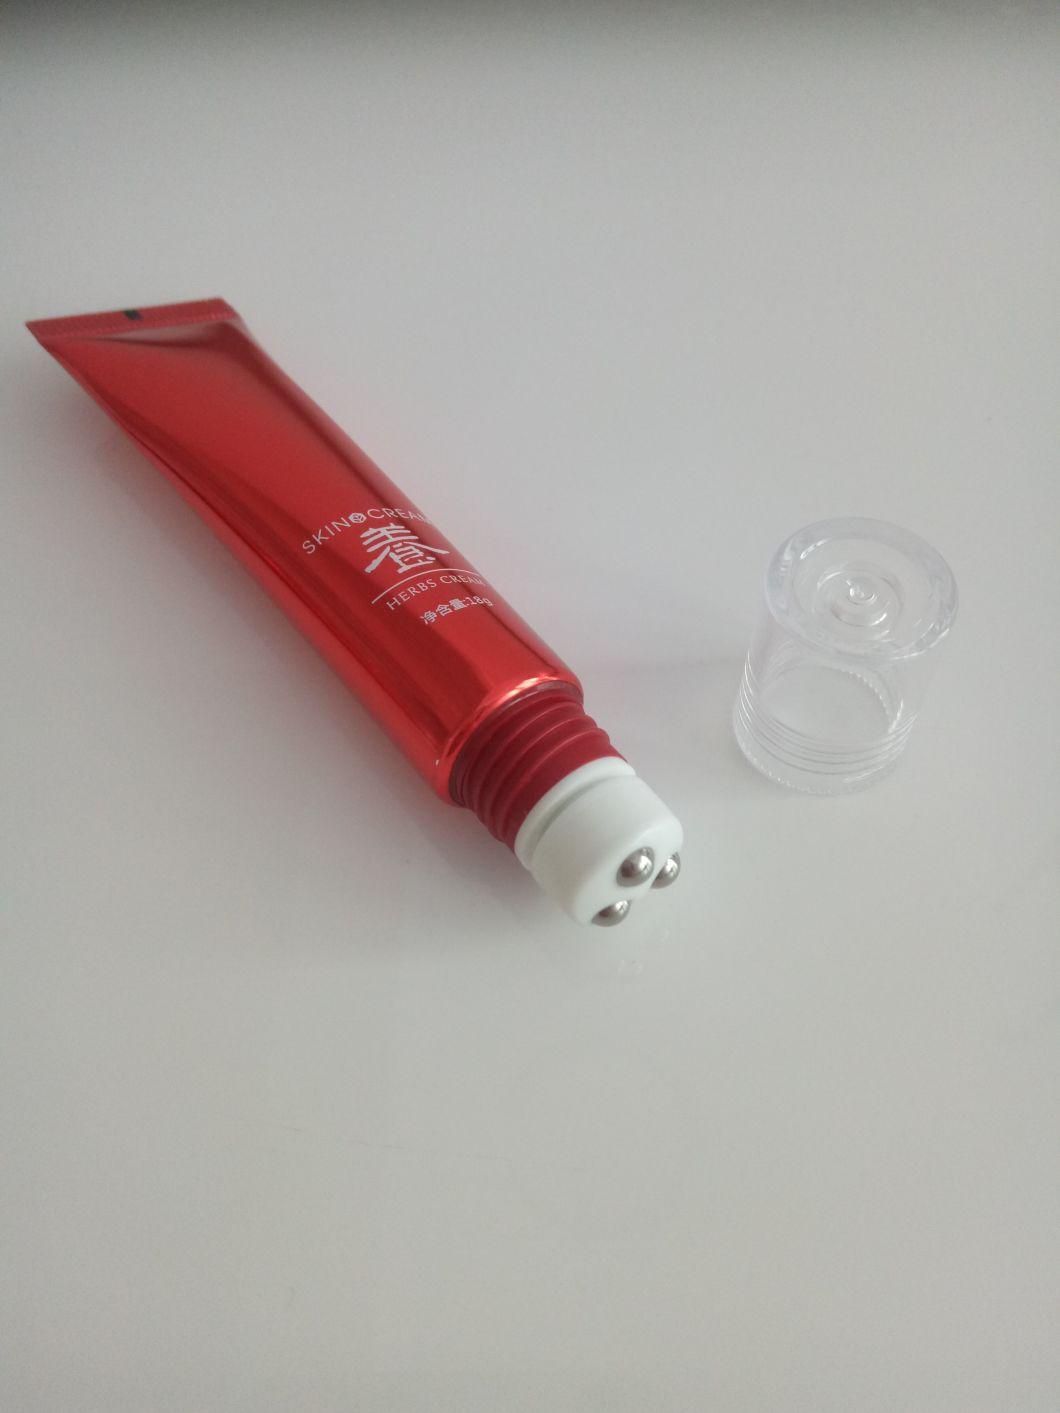 New Design 100ml Lotion Cream Tube with Stainless Steel Roller Ball